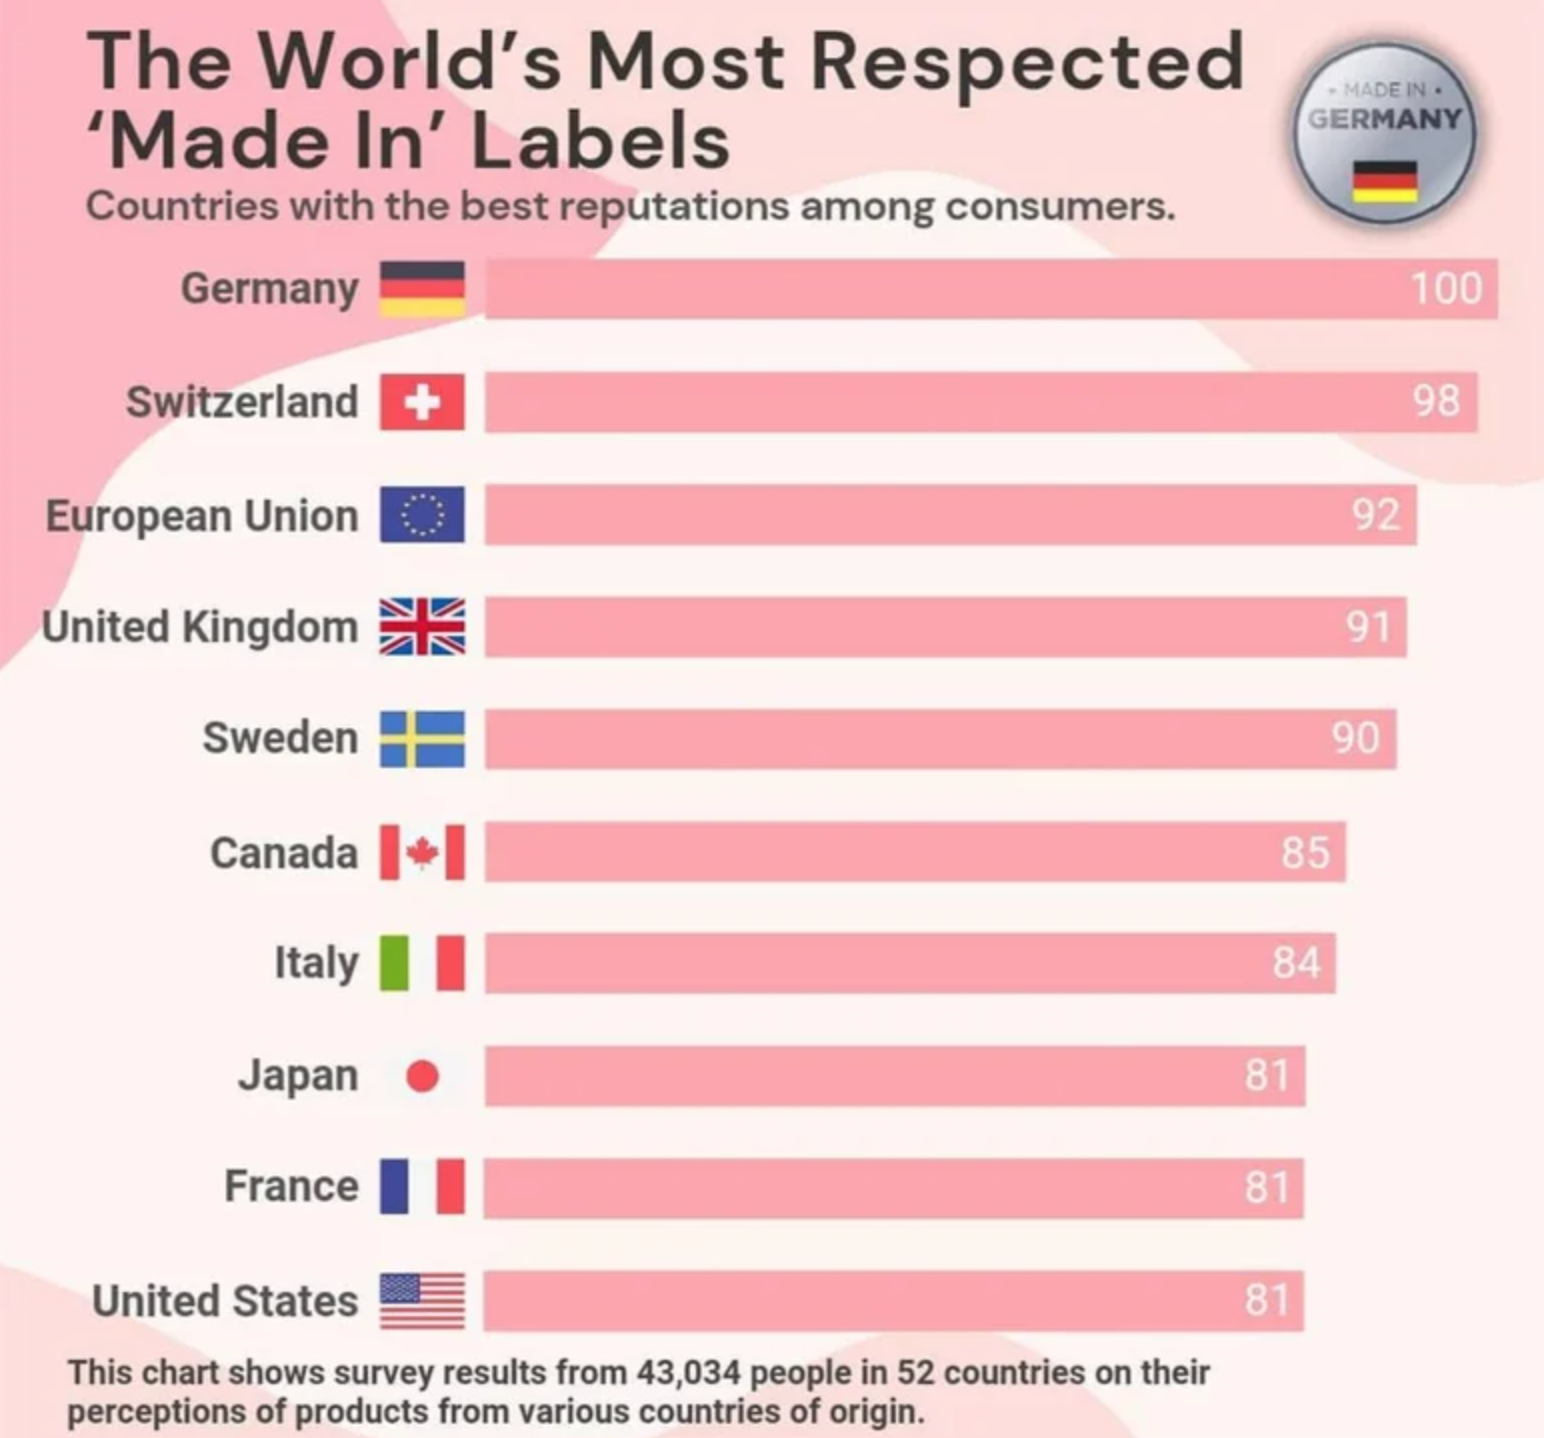 Helpful Guides to life - paper - Germany The World's Most Respected 'Made In' Labels Countries with the best reputations among consumers. Germany 100 Switzerland 98 European Union 92 United Kingdom k 91 Sweden 90 Canada 85 Italy 84 Japan 81 France 81 87 U